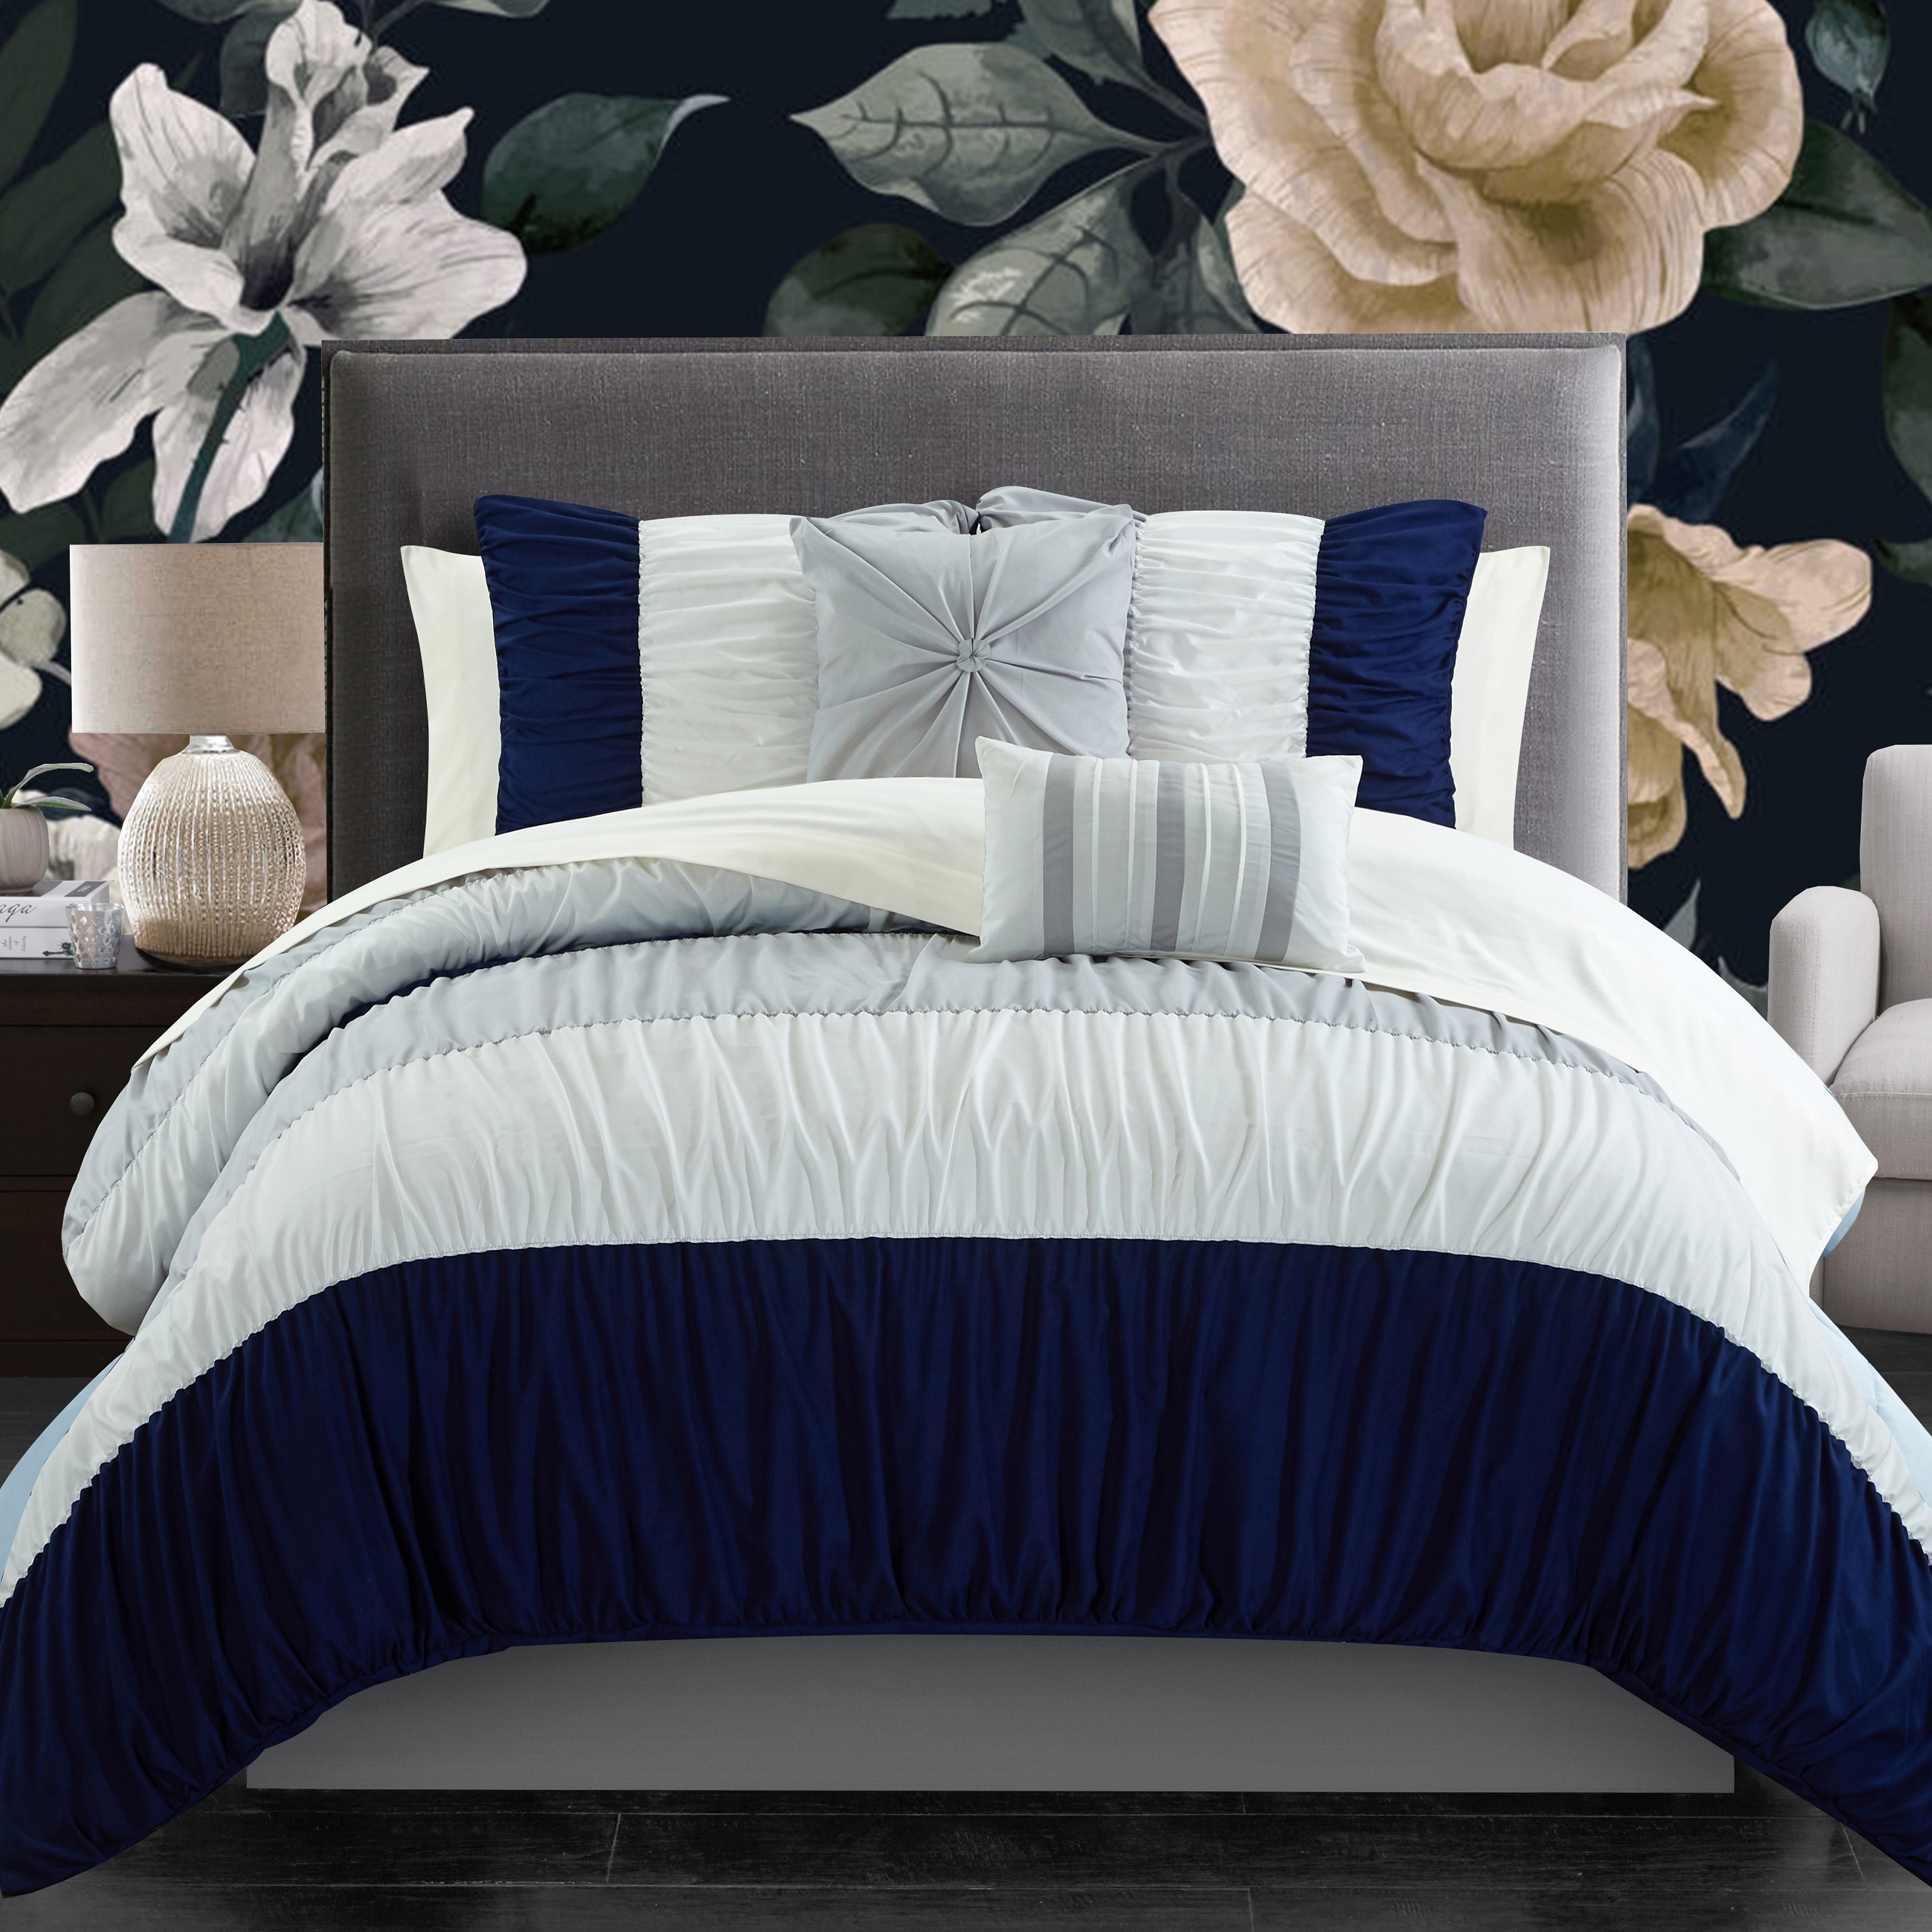 Faye 9 Or 7 Piece Comforter Ruched Color Block Bed In A Bag - Navy, King - 9 Piece